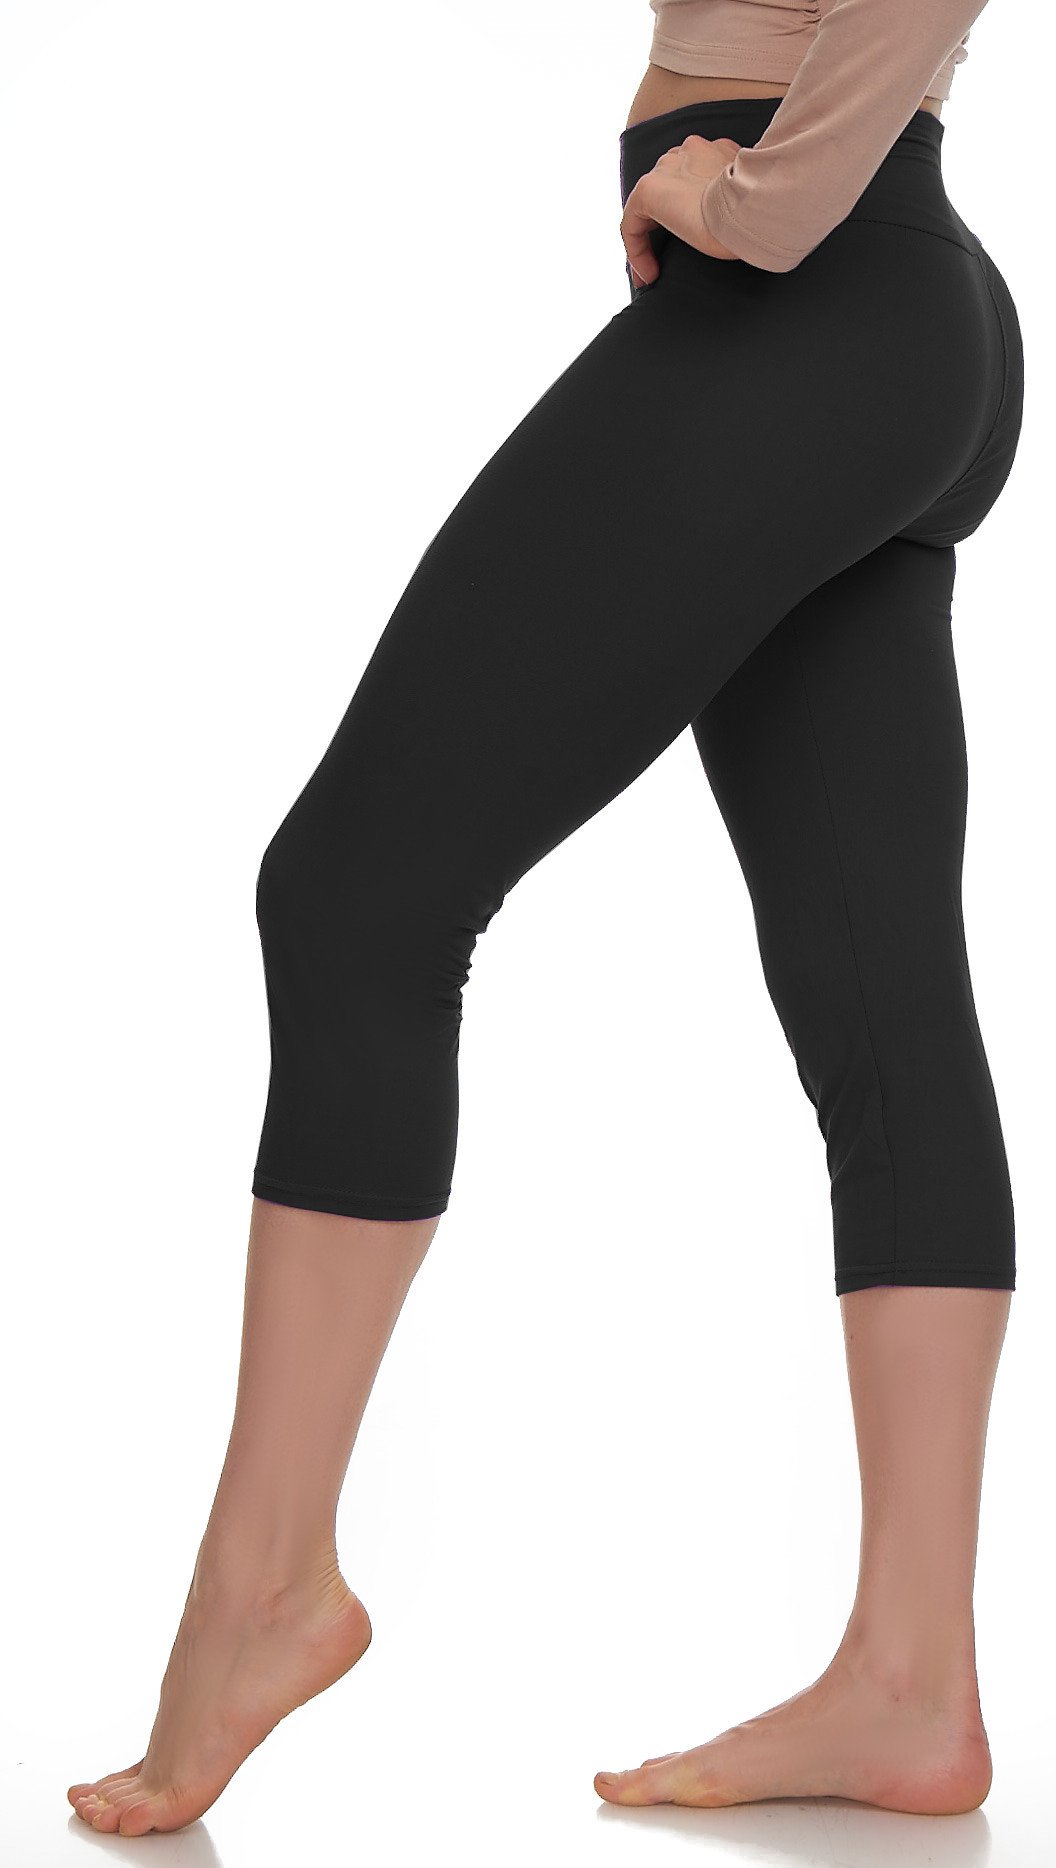 Lush Moda Leggings for Women - Ultra High Waisted - Solid Colors - Stretchy and Buttery Soft